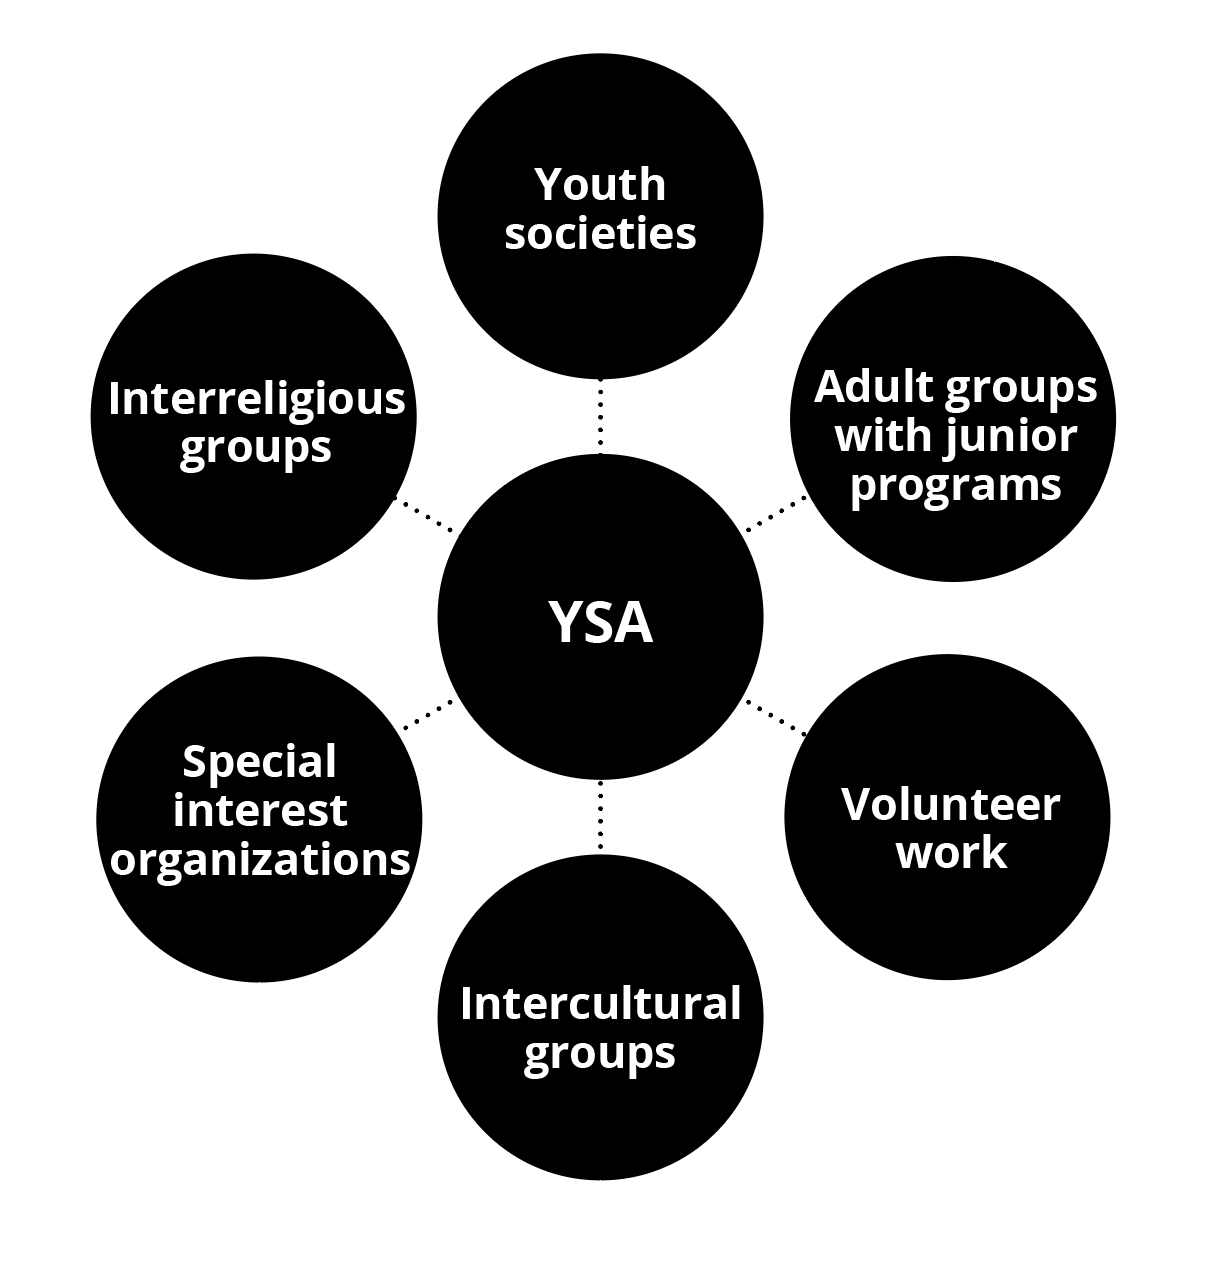 A web of connected circles. YSA (youth social action) is in the center, and these radiate from YSA: youth societies, adult groups with junior programs, volunteer work, intercultural groups, special interest organizations, and interreligious groups.